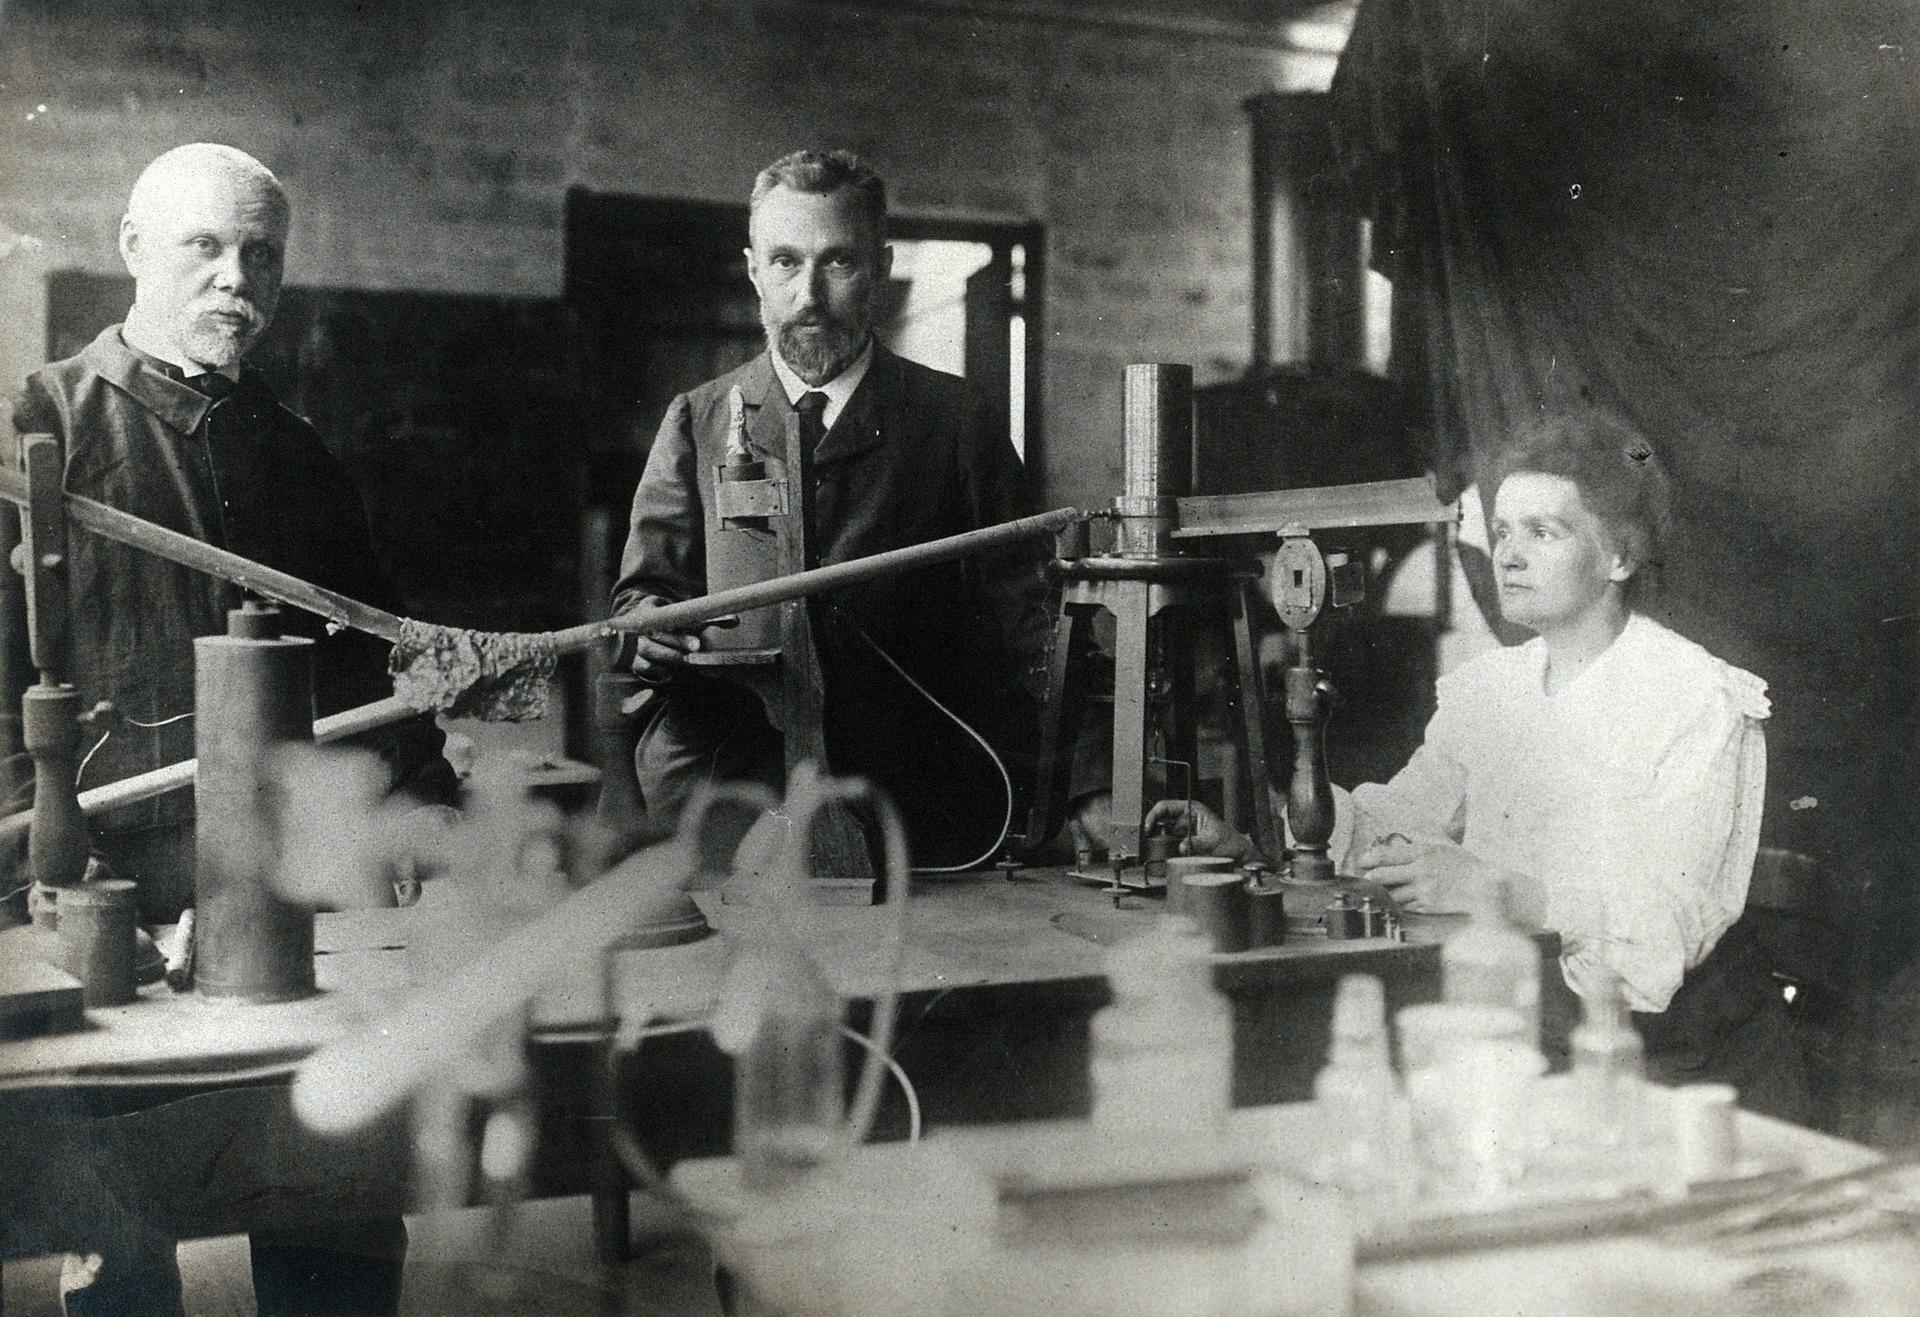 A black and white photo showing three scientists in an old looking laboratory.